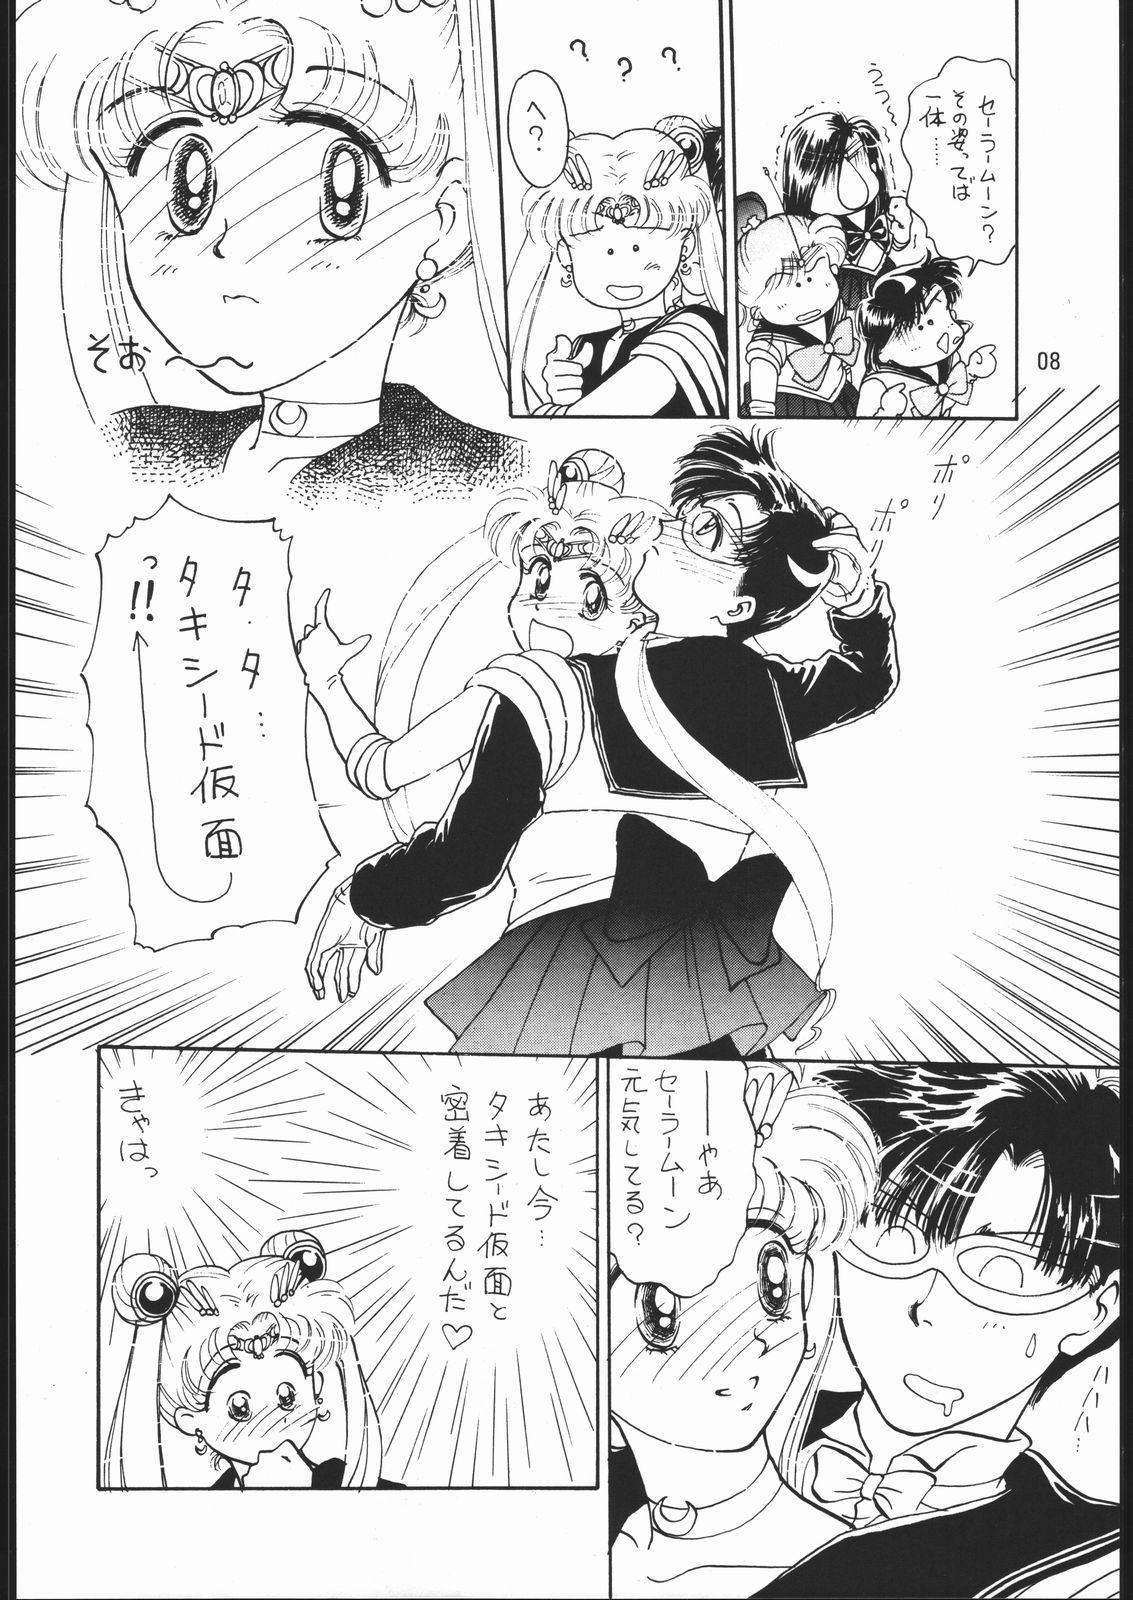 Naked Sex うさぎがピョン!! - Sailor moon Bubble Butt - Page 7